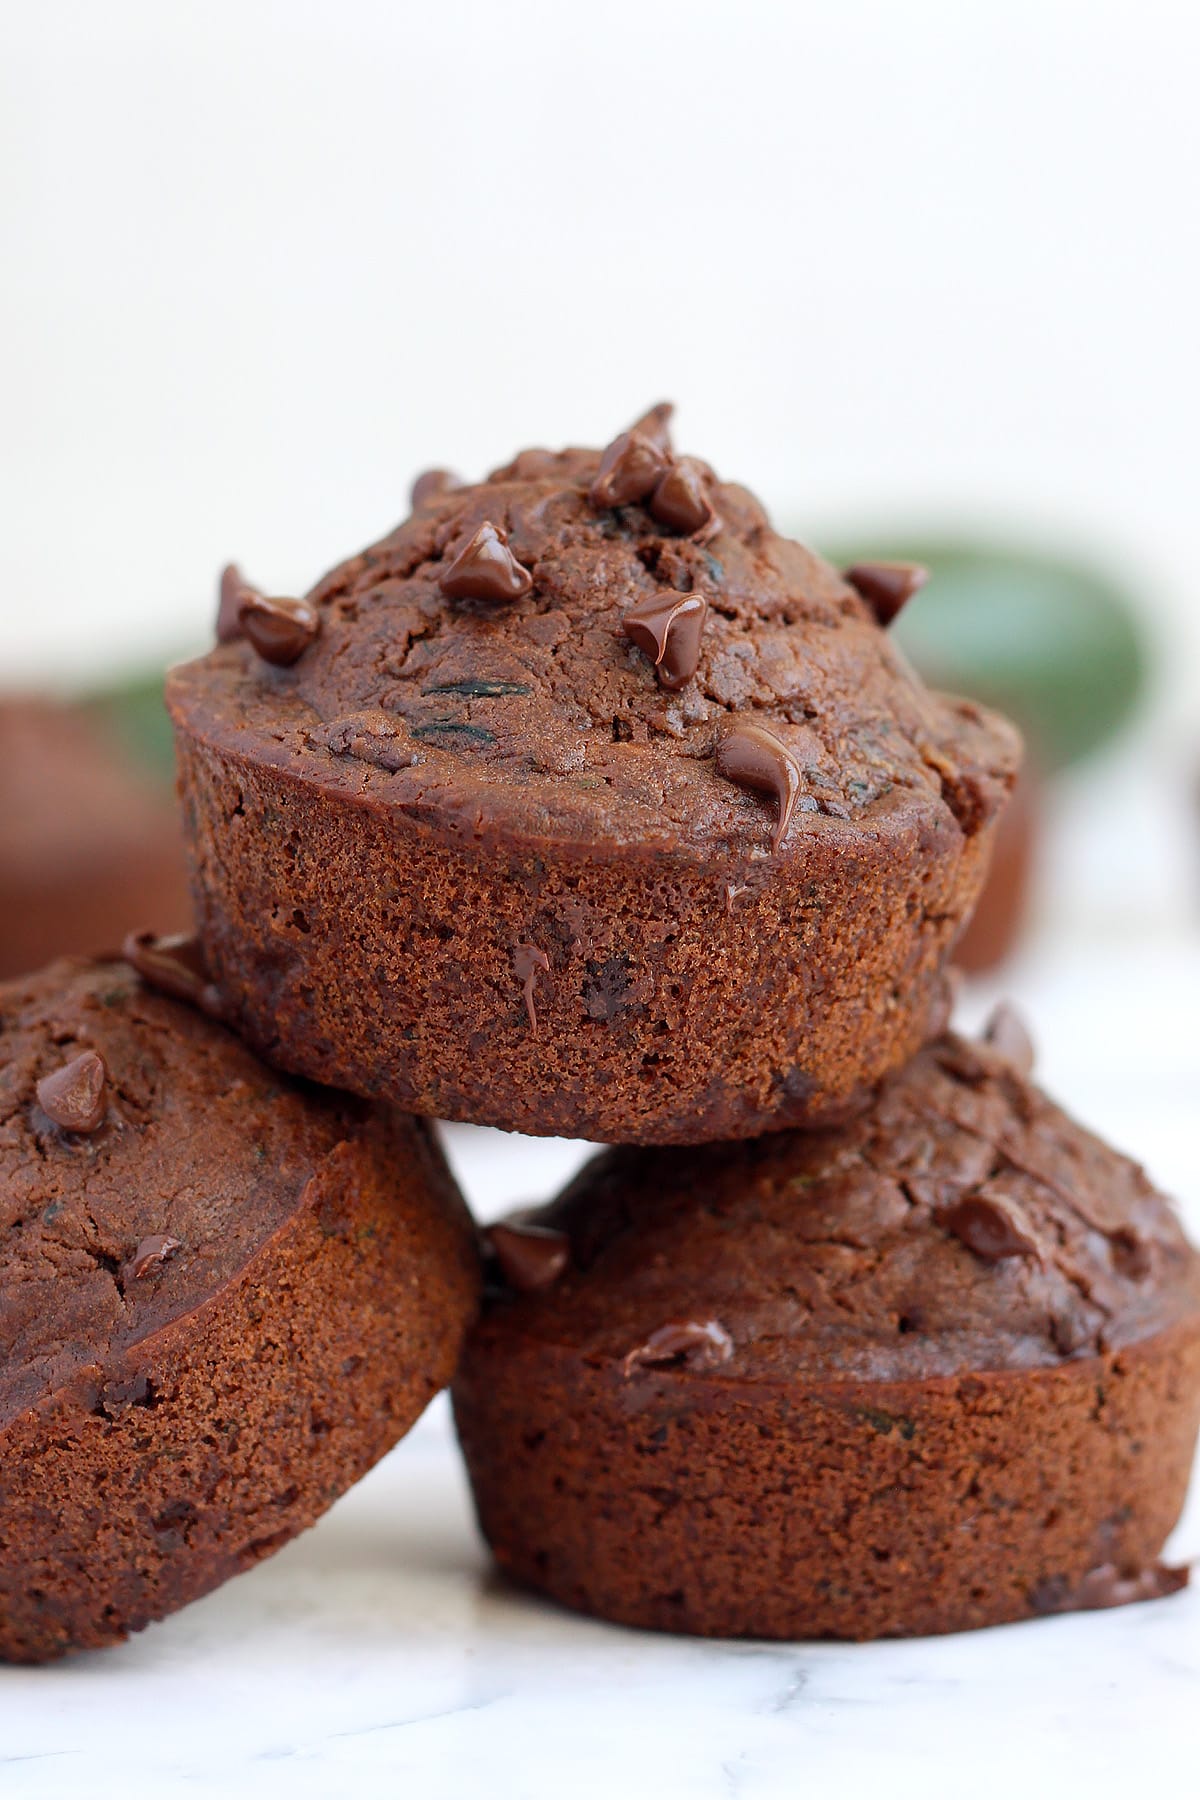 Three double chocolate zucchini muffins stacked on top of each other in front of a zucchini.